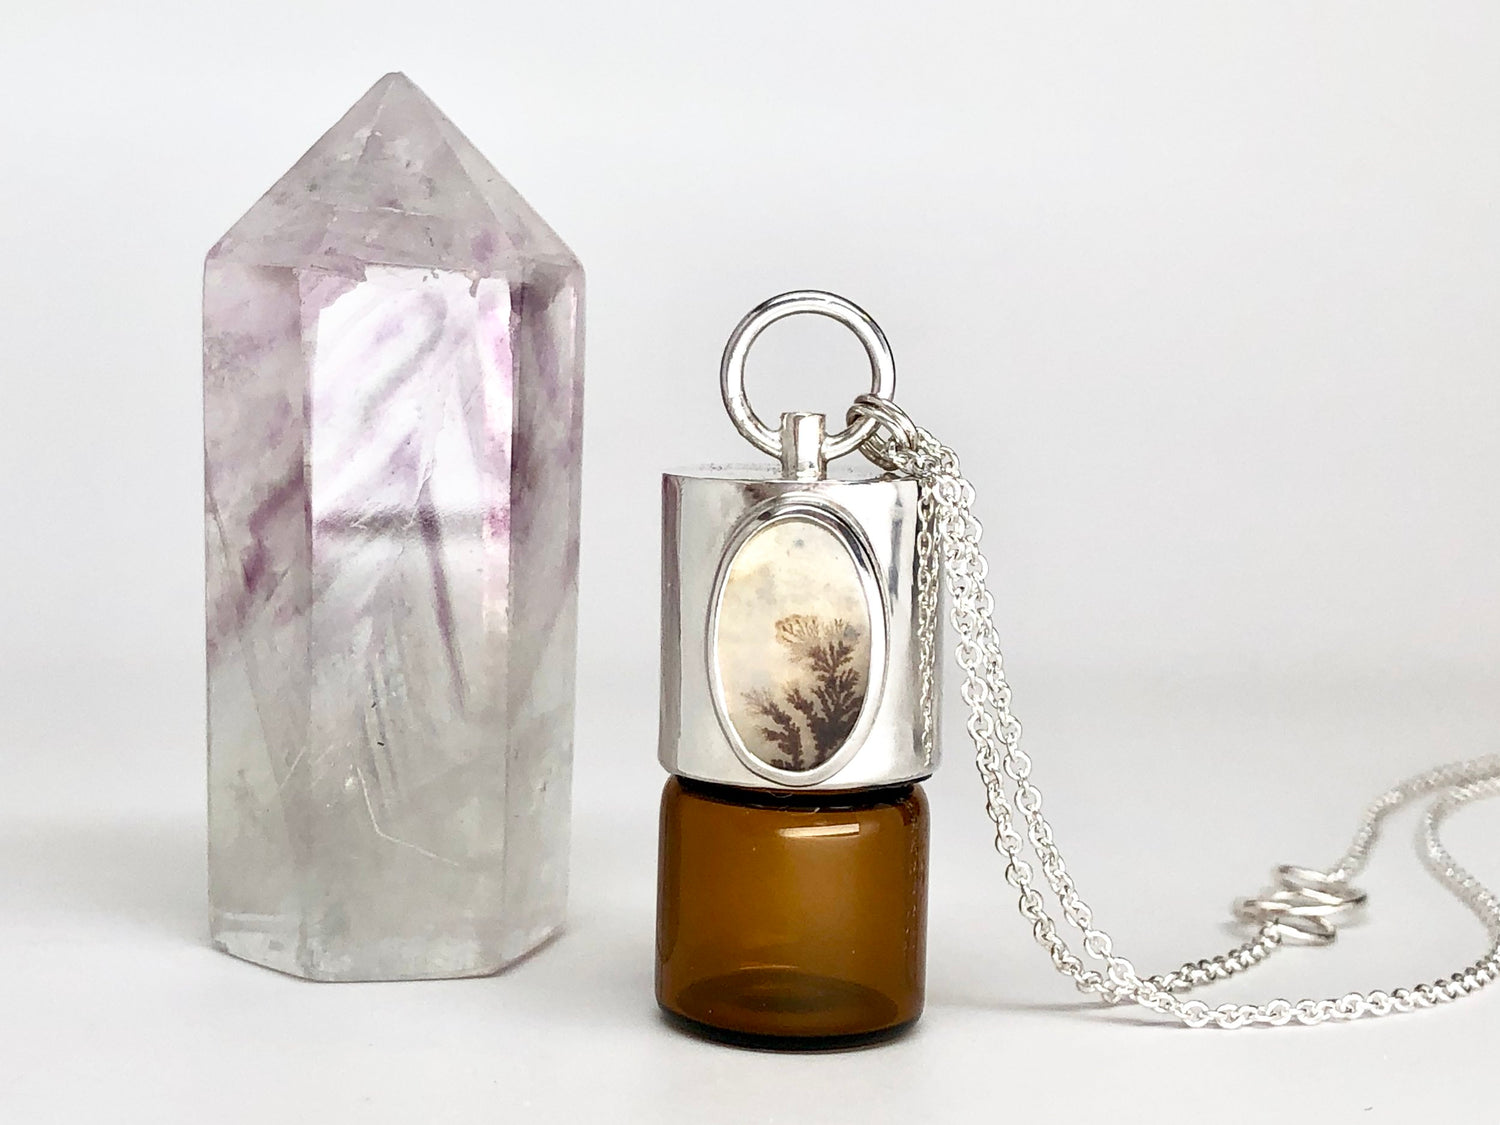 Top 12 Best Smelling Essential Oils For Diffuser Necklaces